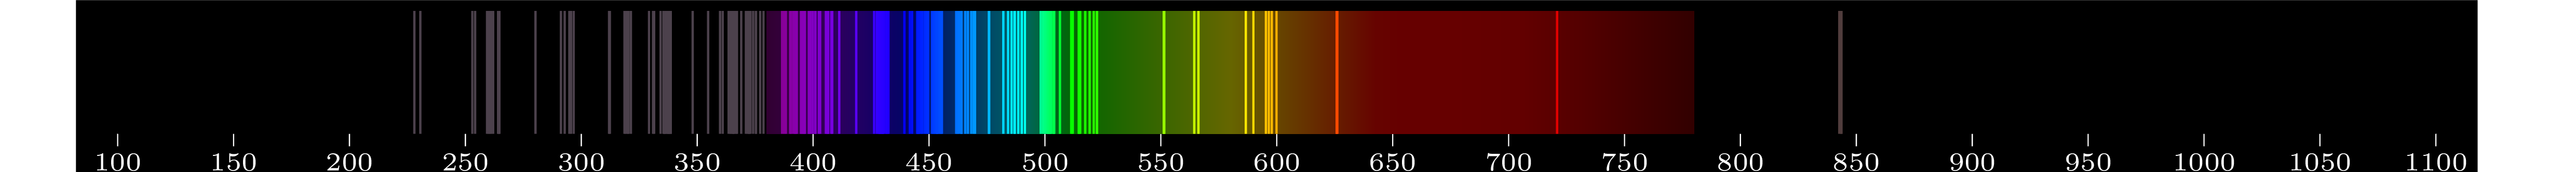 emmision spectra of element Ti